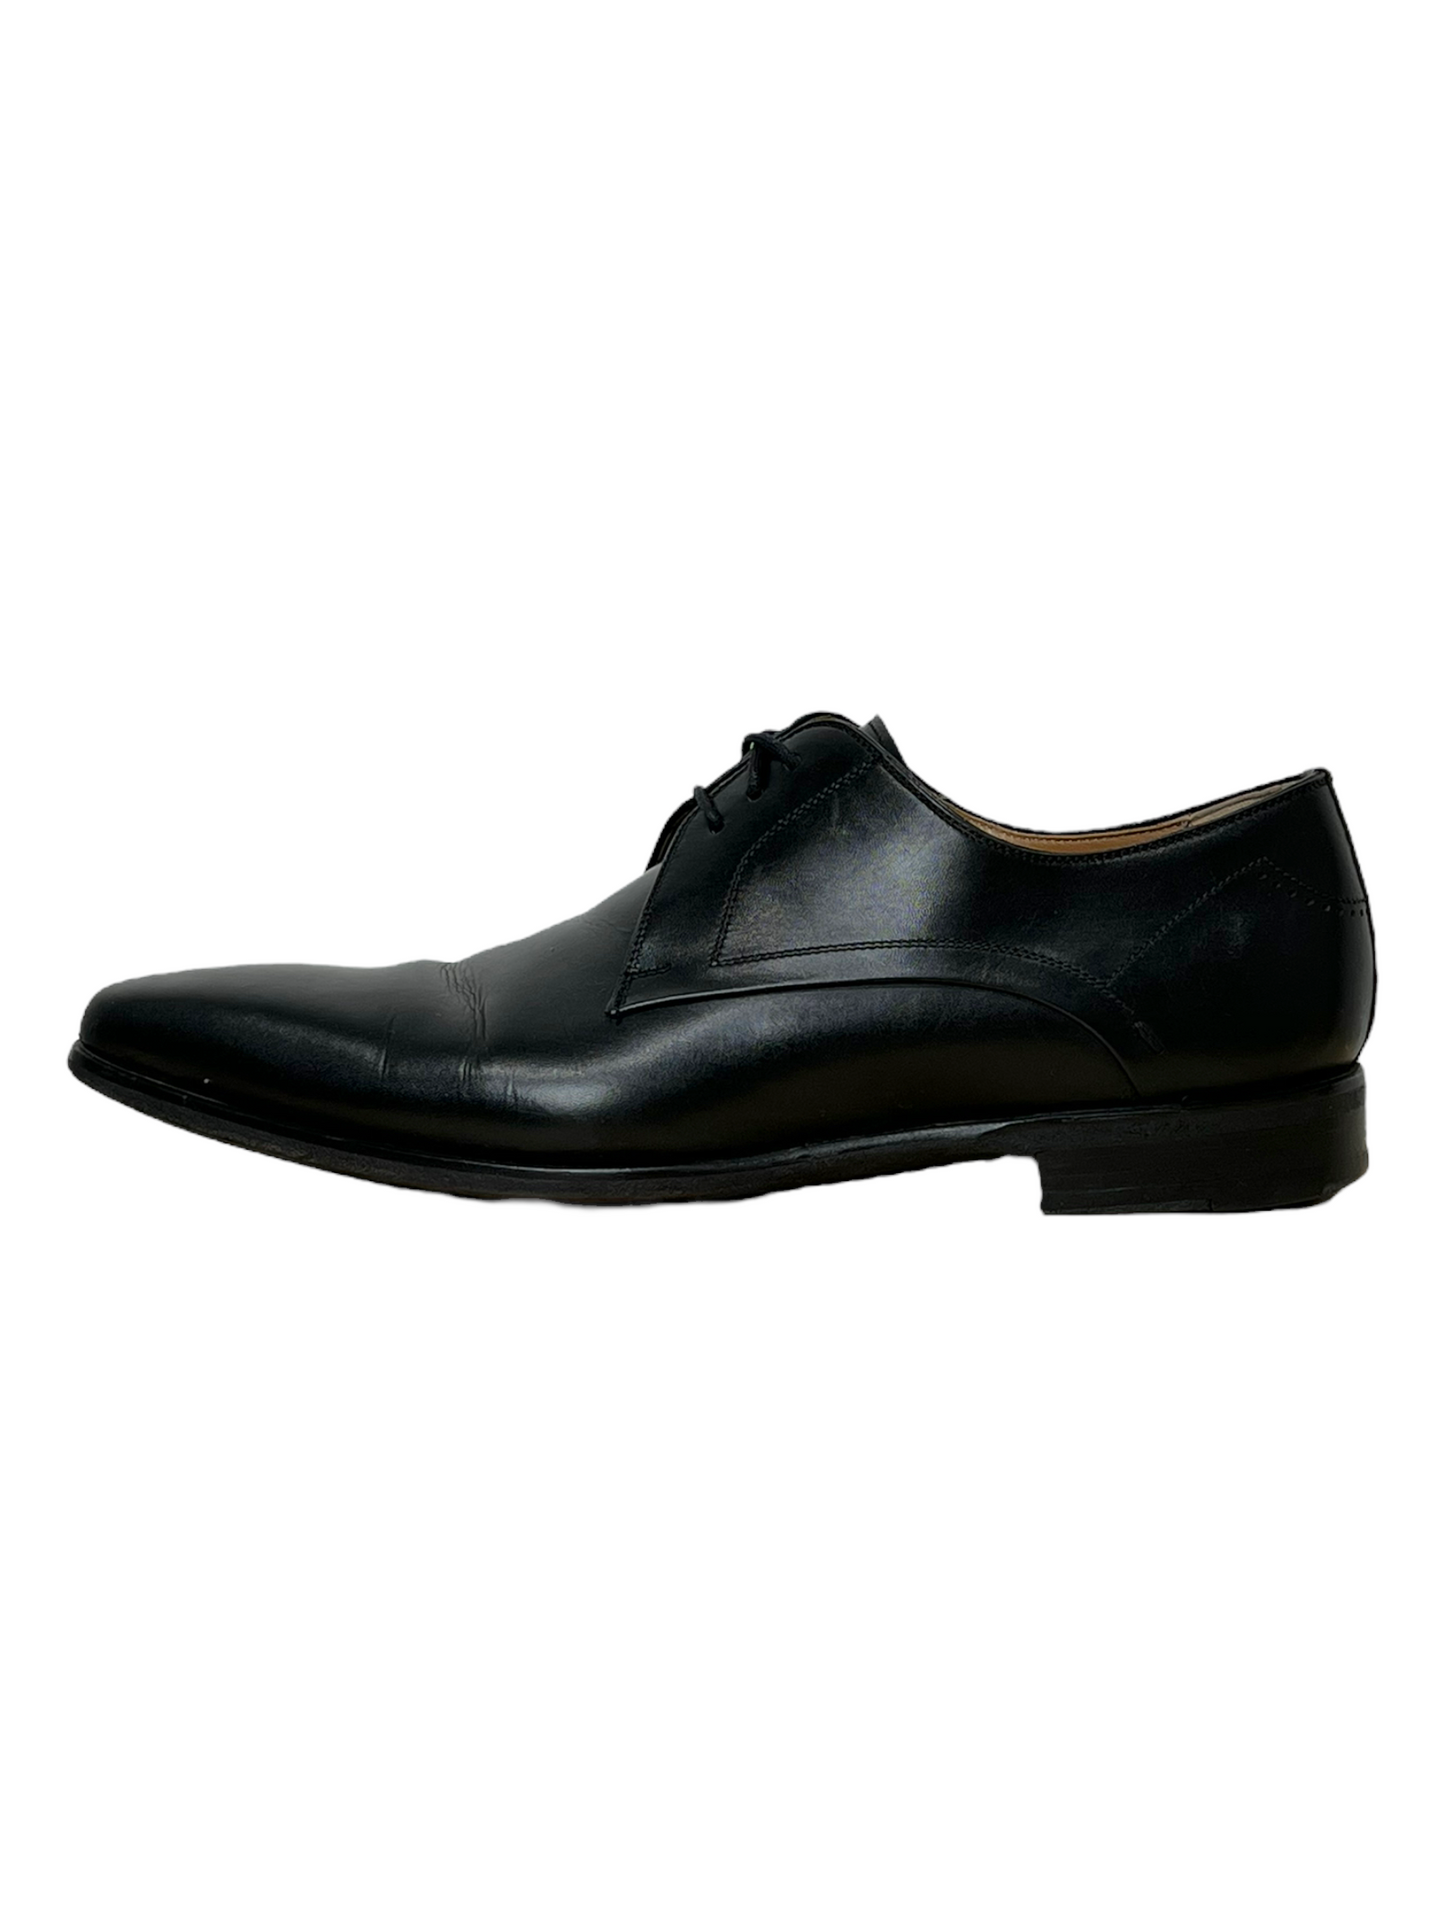 Magnanni Black Leather Derby Dress Shoes - Genuine Design Luxury Consignment for Men. New & Pre-Owned Clothing, Shoes, & Accessories. Calgary, Canada